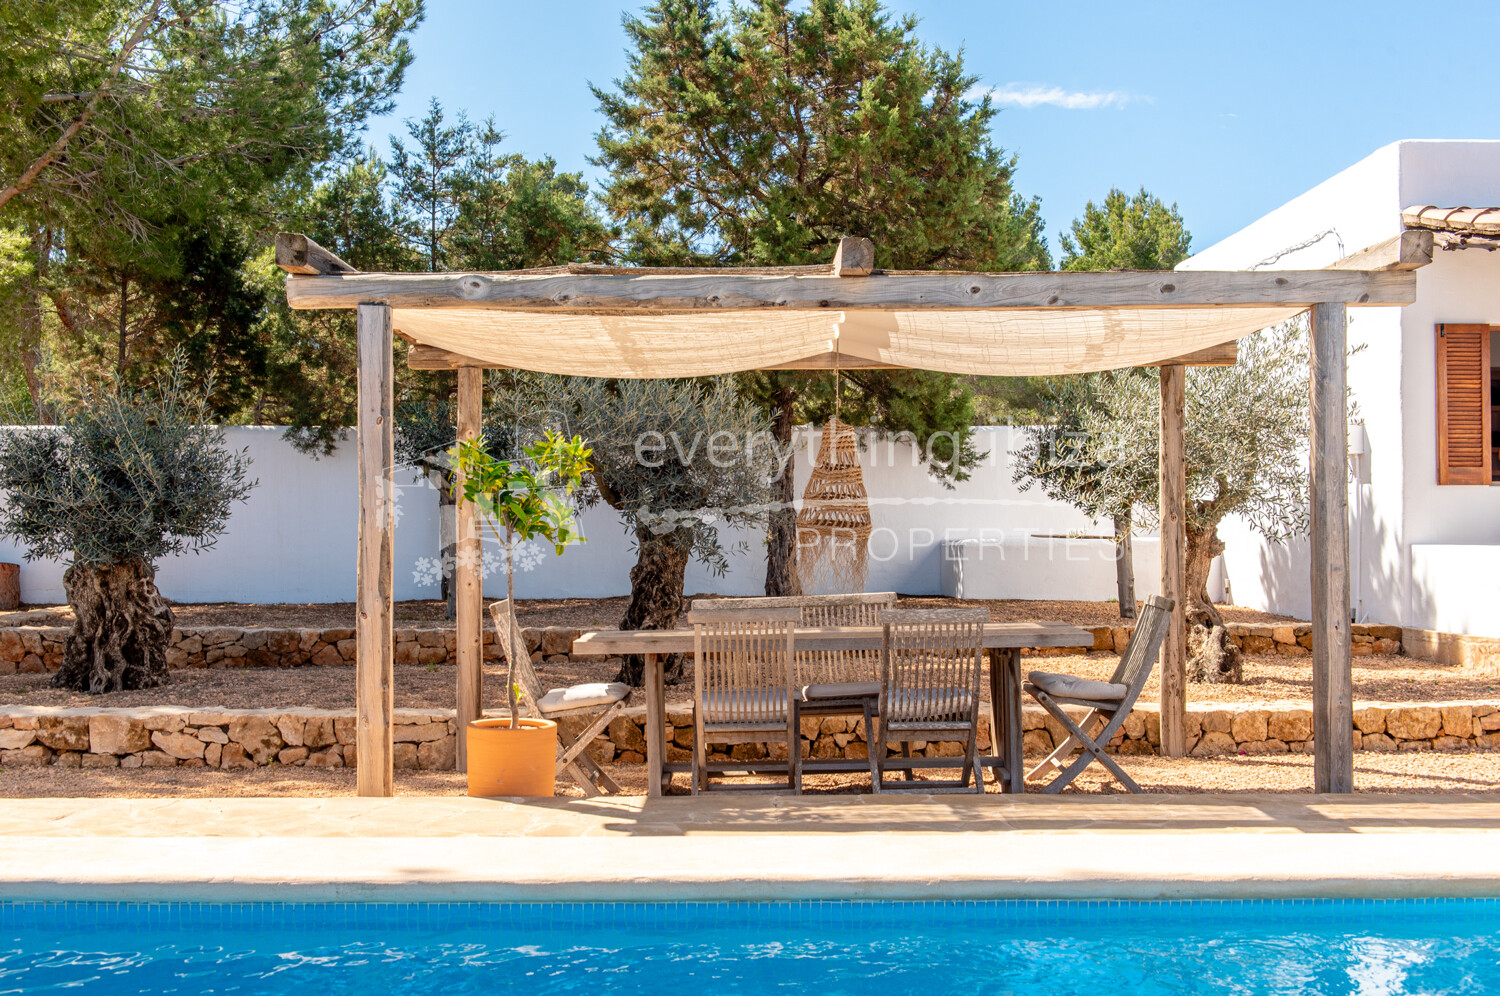 Cosy Renovated Turn Key Ready Detached Villa Close to the Local Beach, ref. 1716, for sale in Ibiza by everything ibiza Properties